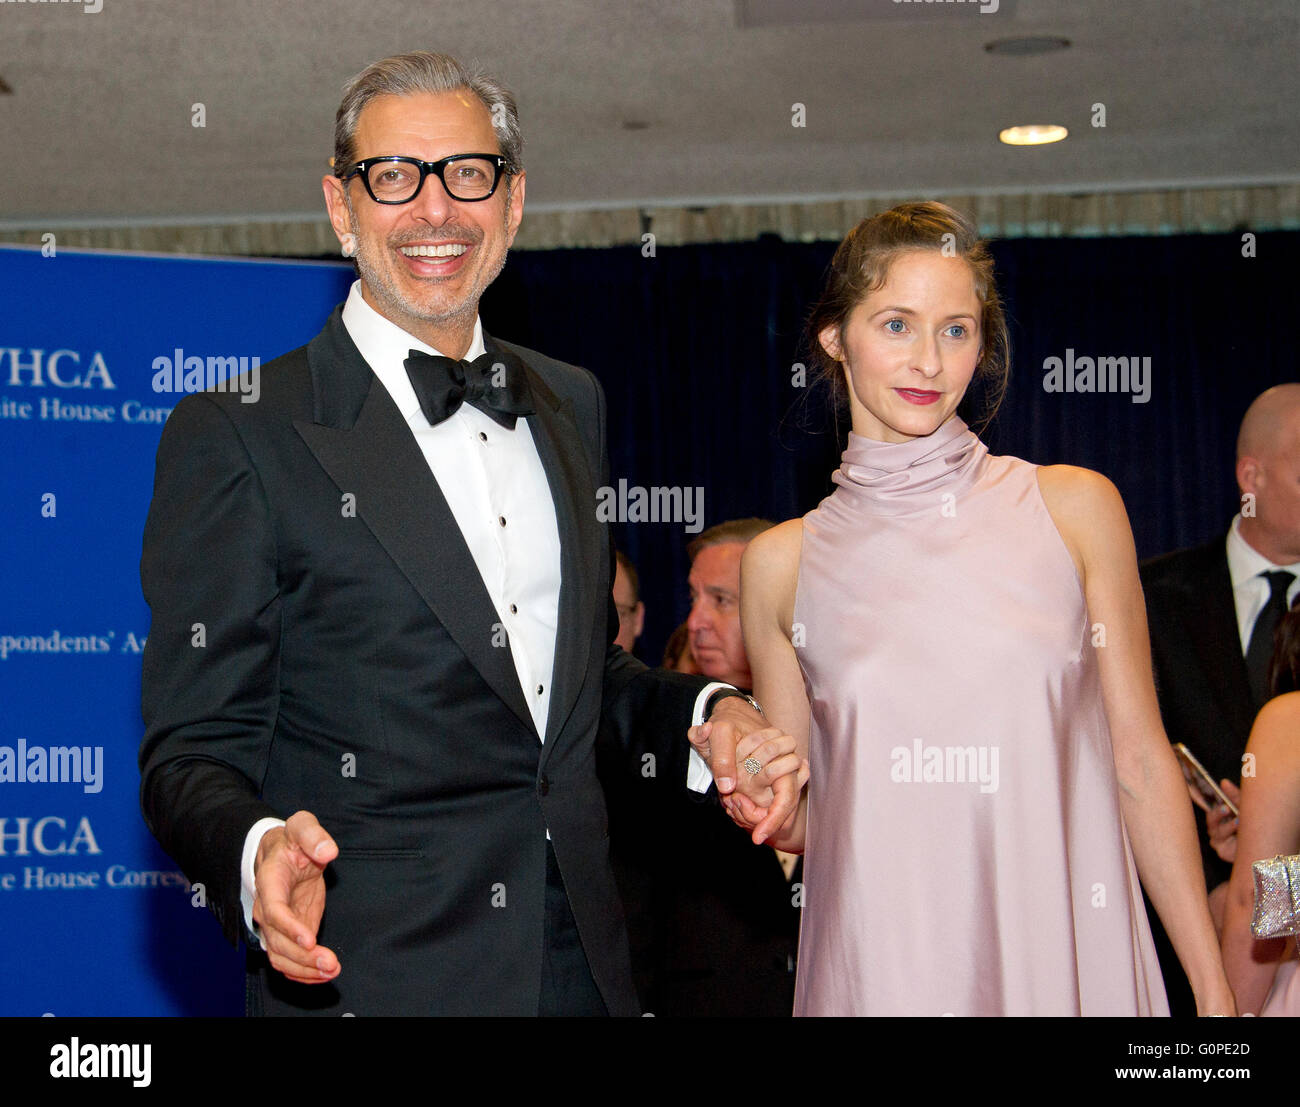 Actor Jeff Goldblum, left, and Emilie Livingston arrive for the 2016 White House Correspondents Association Annual Dinner at the Washington Hilton Hotel on Saturday, April 30, 2016. Credit: Ron Sachs / CNP (RESTRICTION: NO New York or New Jersey Newspapers or newspapers within a 75 mile radius of New York City) - NO WIRE SERVICE - Stock Photo